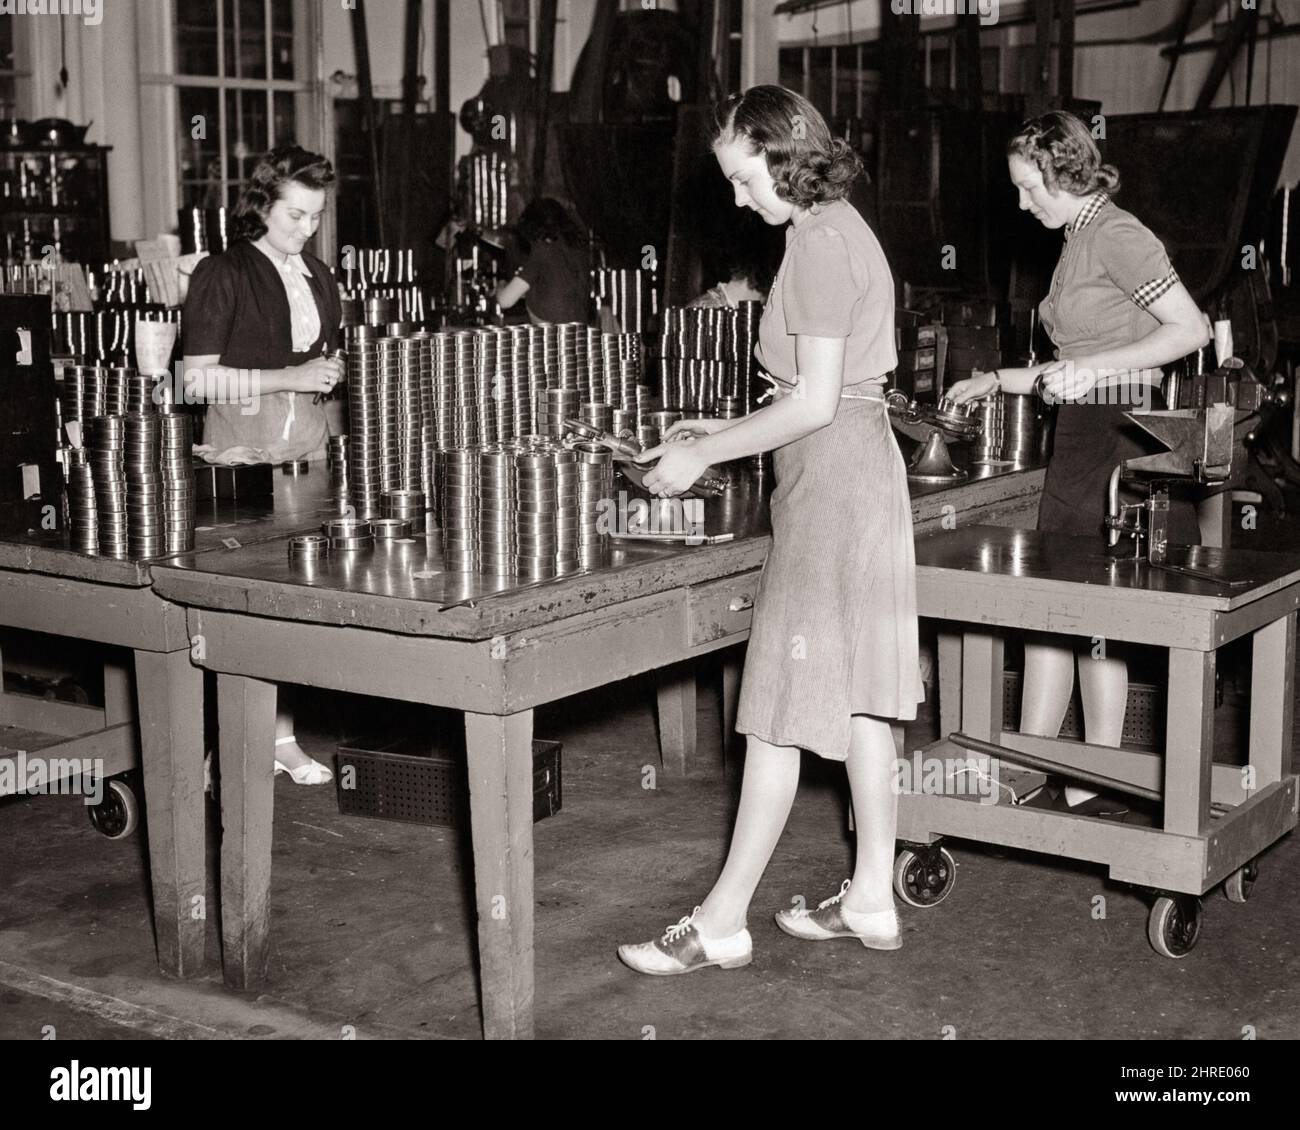 1940s WORLD WAR 2 WOMEN DEFENSE INDUSTRY WORKERS ASSEMBLING METAL,BALL BEARINGS AT ROLLER BEARING COMPANY - i3593 HAR001 HARS YOUNG ADULT PRODUCTION TEAMWORK SATISFACTION CONFLICT FEMALES WW2 JOBS COPY SPACE FULL-LENGTH HALF-LENGTH LADIES PERSONS TEENAGE GIRL B&W SKILL OCCUPATION SKILLS GLOBAL STRENGTH WORLD WARS ASSEMBLING SADDLE SHOES LABOR WORLD WAR WORLD WAR TWO WORLD WAR II OPPORTUNITY EMPLOYMENT OCCUPATIONS BEARING COMPANY STYLISH SUPPORT TEENAGED WORLD WAR 2 EMPLOYEE BEARINGS DEFENSE JUVENILES MID-ADULT MID-ADULT WOMAN YOUNG ADULT WOMAN BLACK AND WHITE CAUCASIAN ETHNICITY CIVILIAN Stock Photo